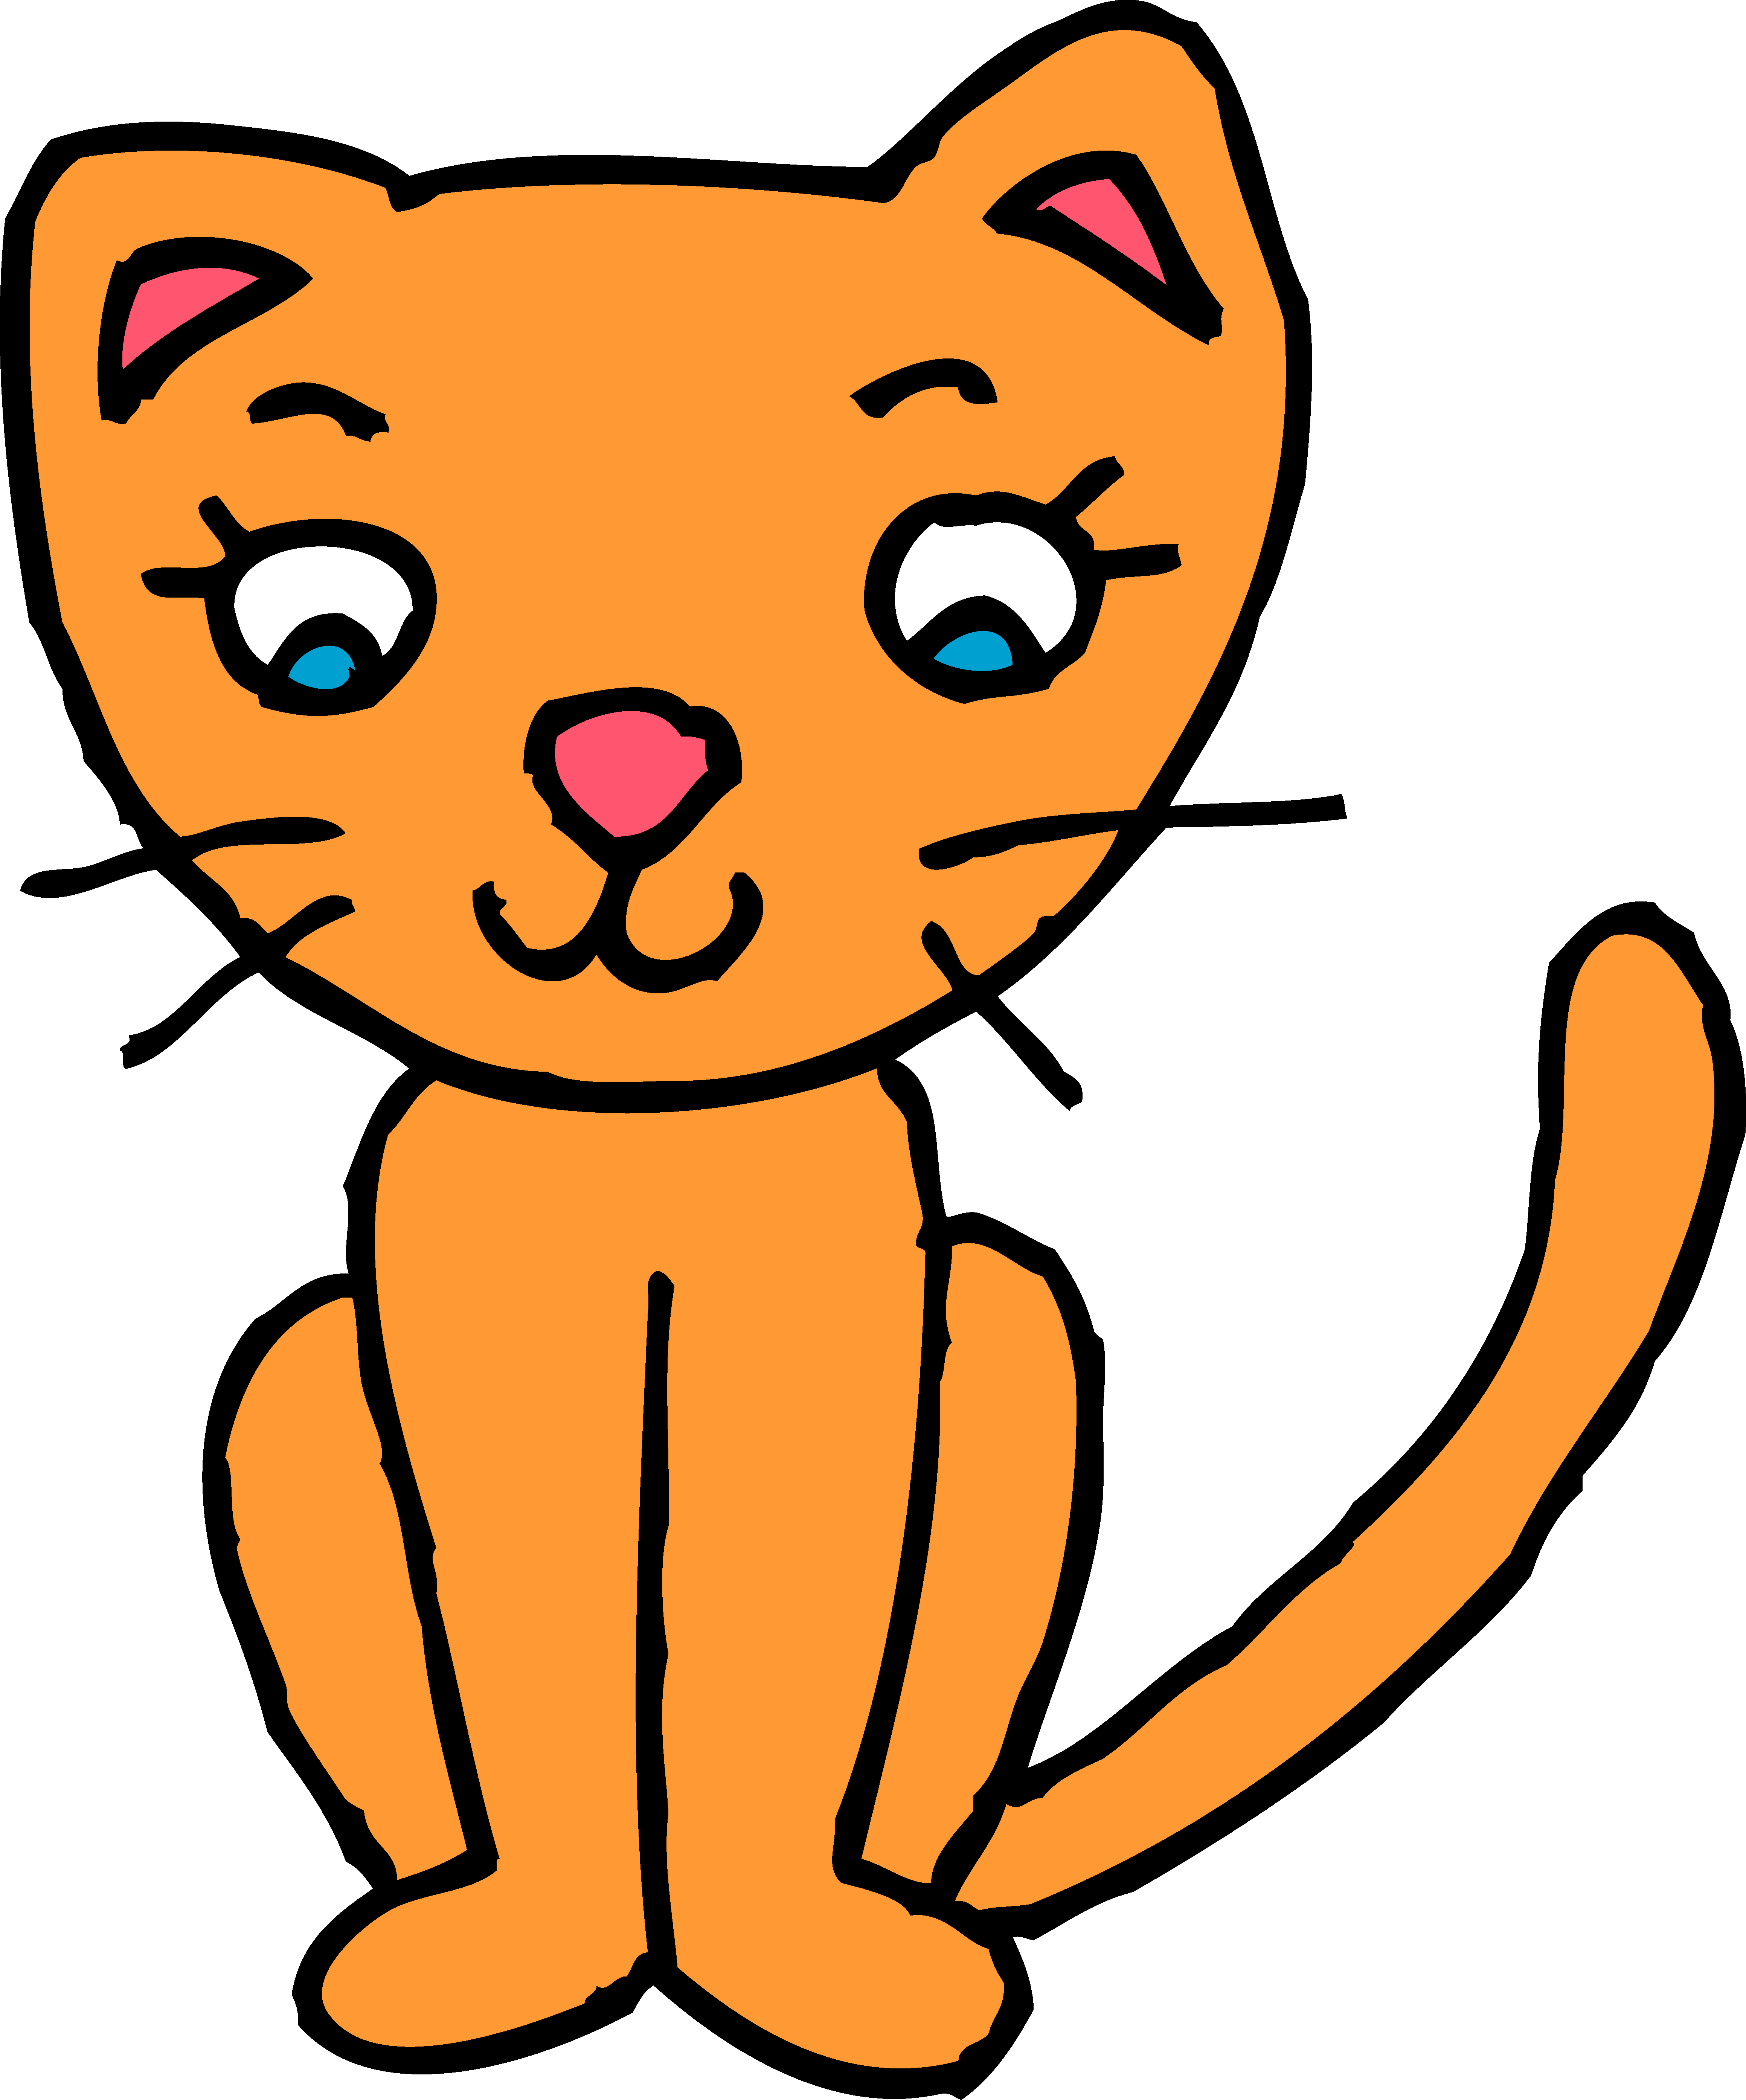 Cute cat clipart free clipart images